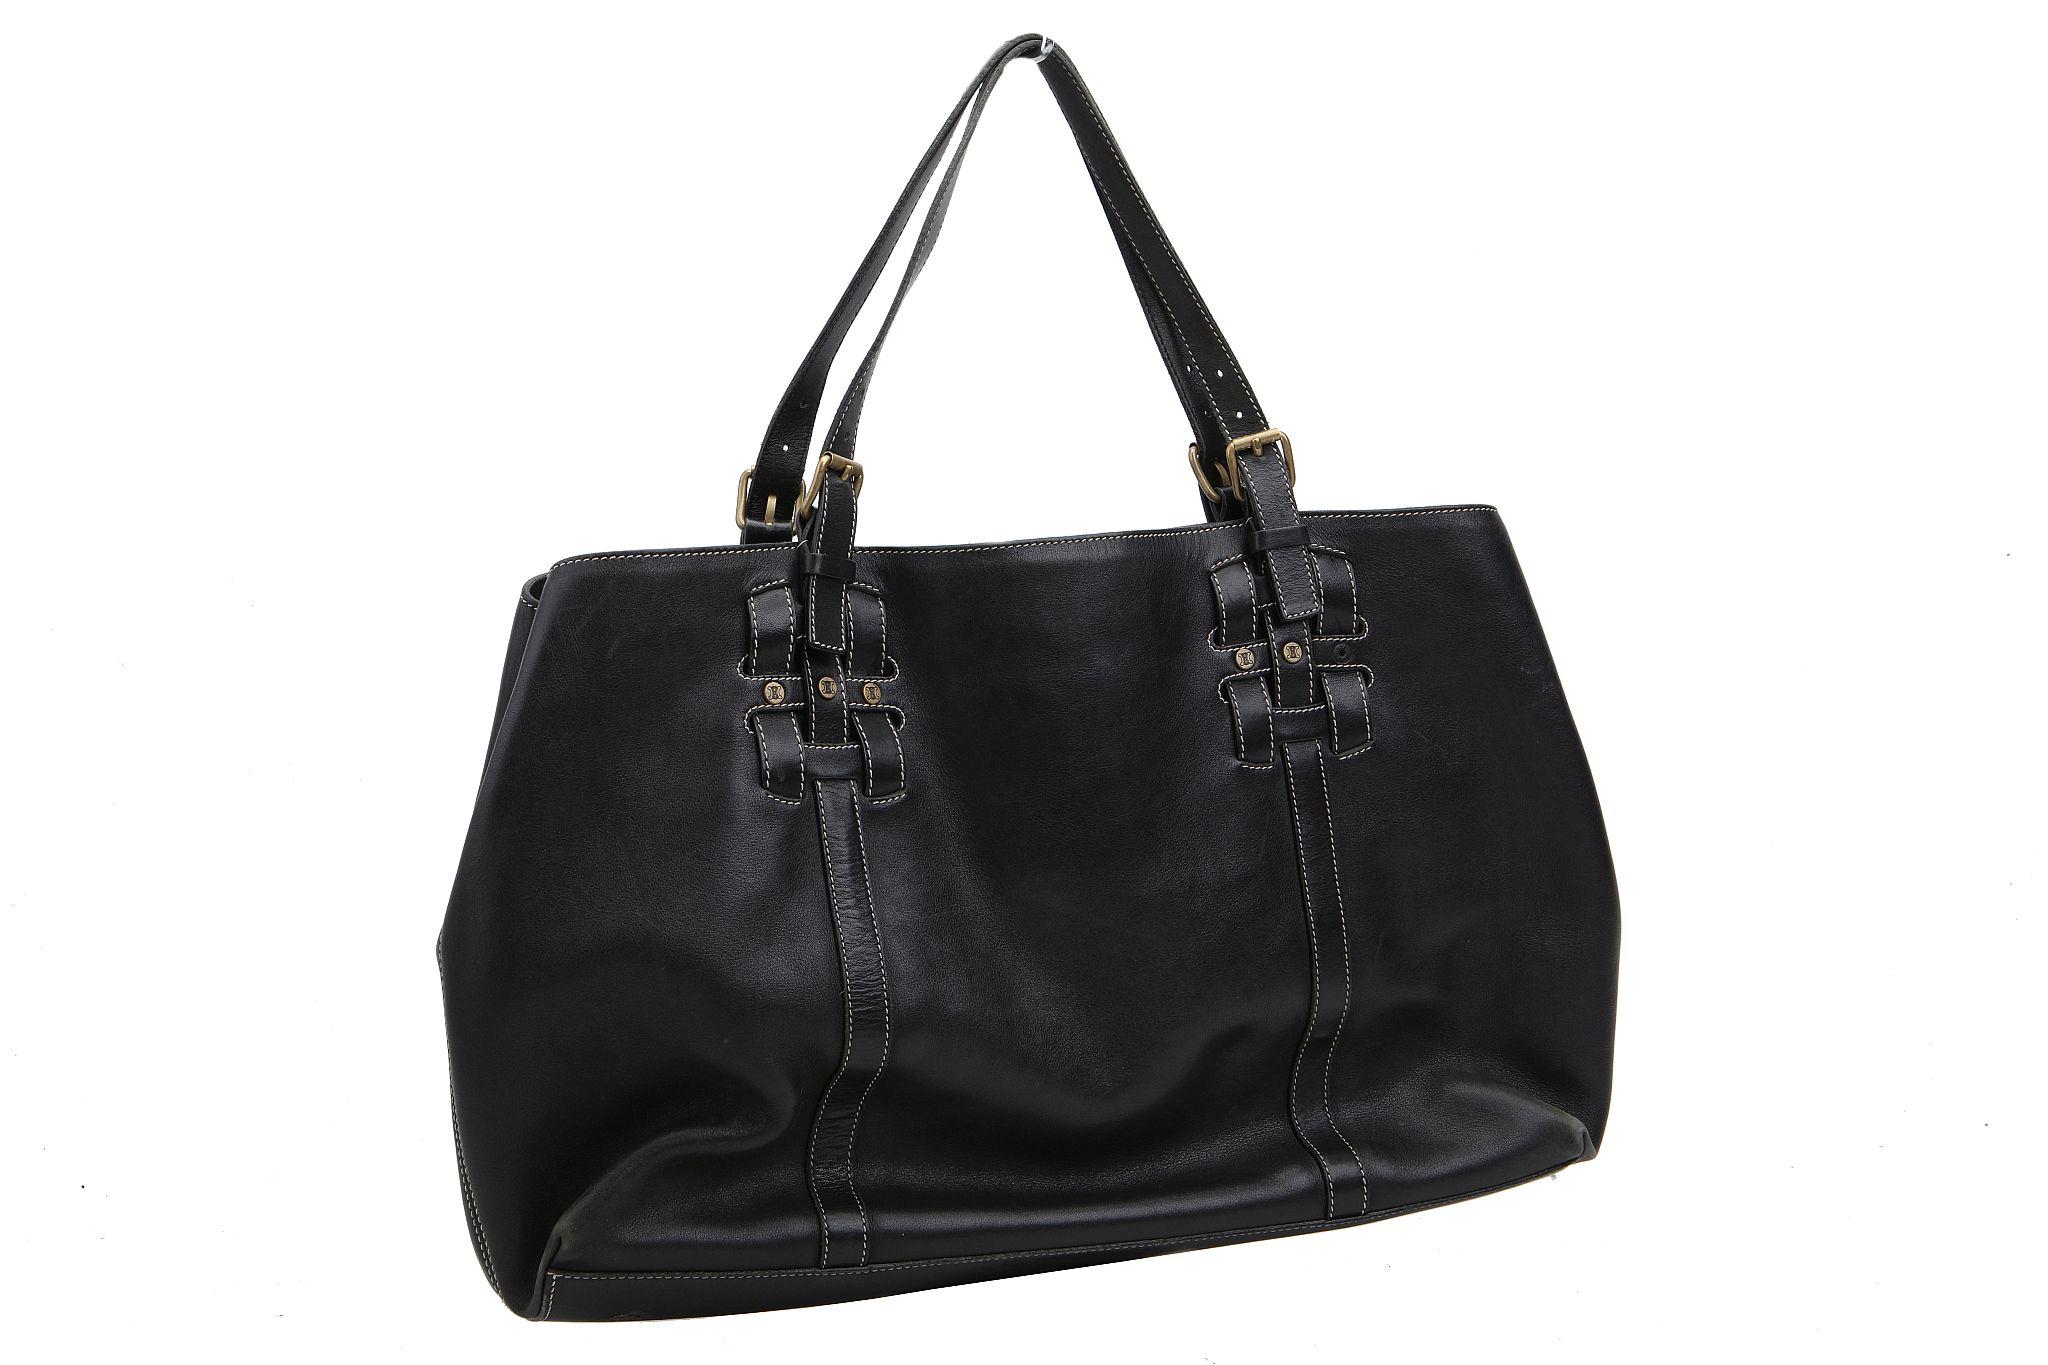 CELINE SHOPPER, black leather with white stitching, brass hardware, 48cm wide, 30cm high - Image 3 of 10